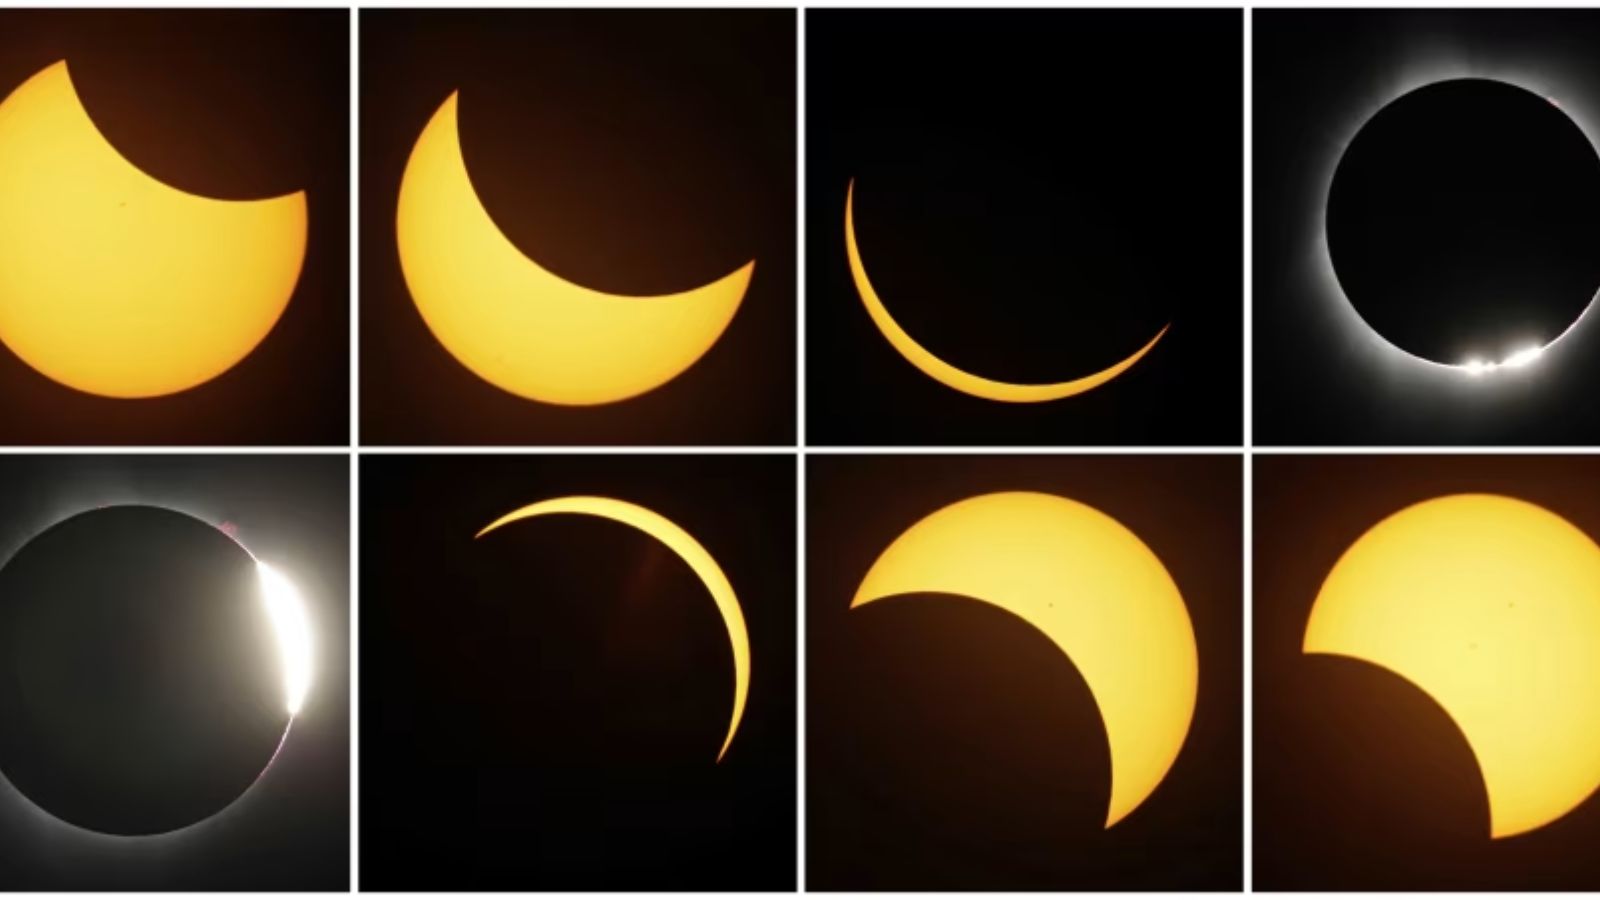 Monday solar eclipse available to watch online...